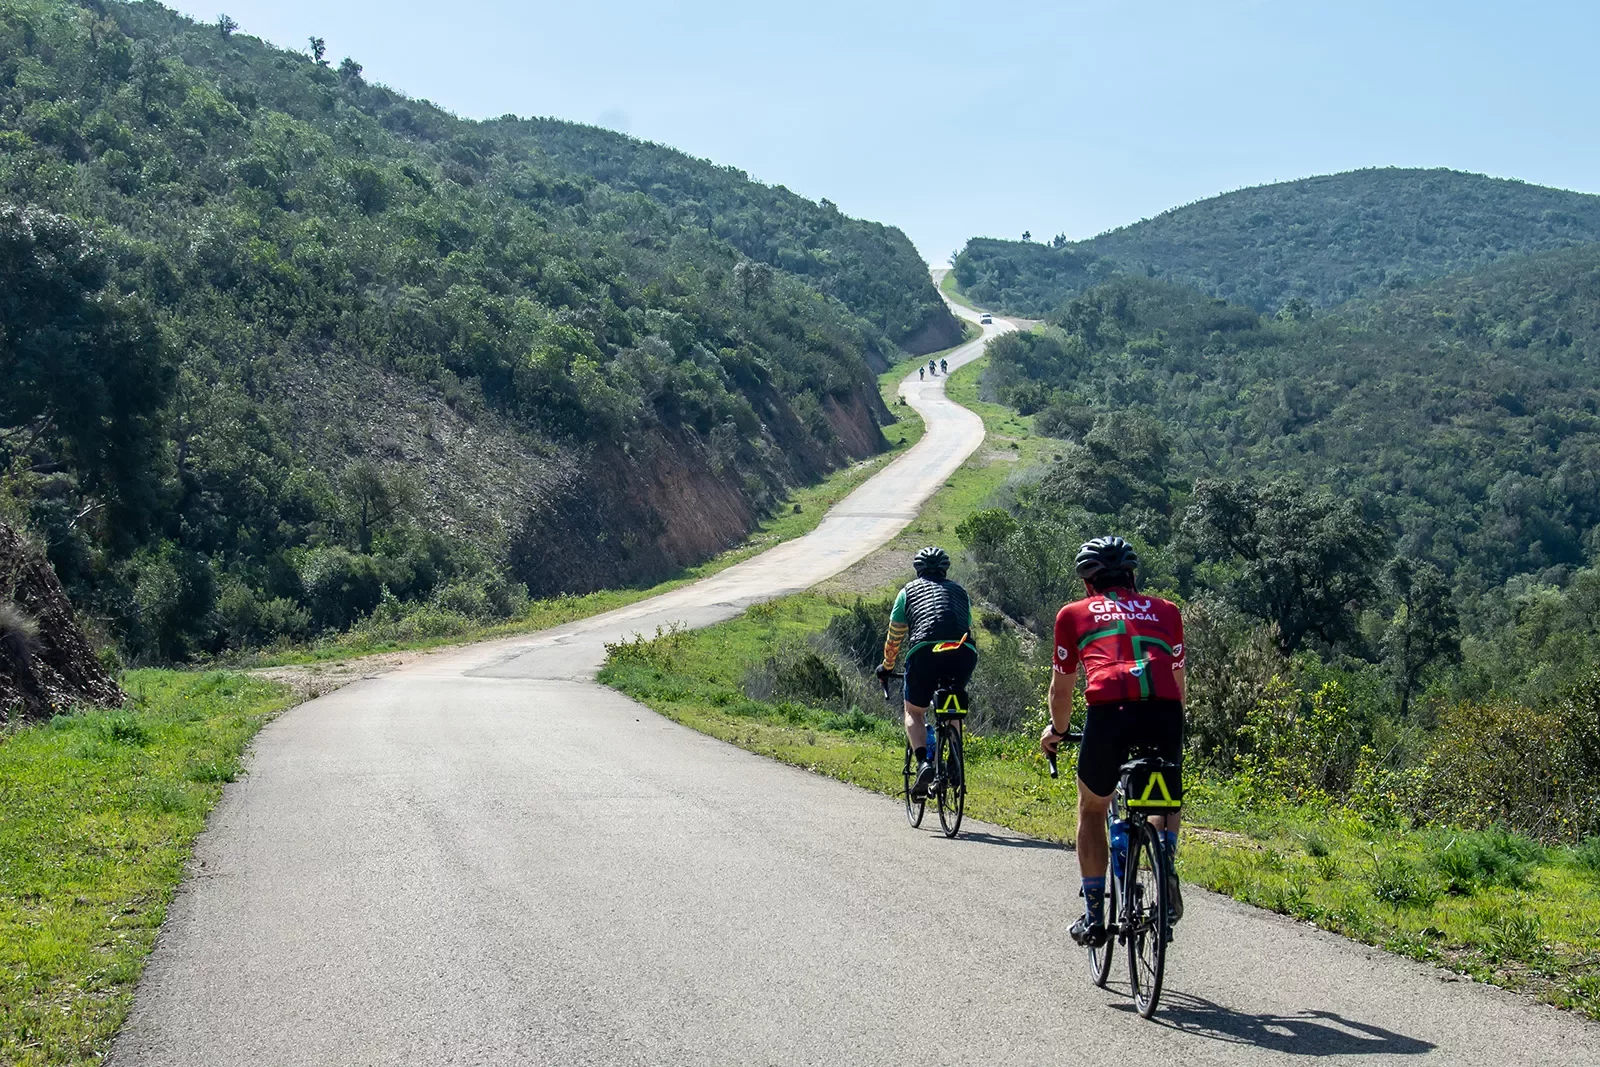 Backgrounds guests biking up hill in Portugal.